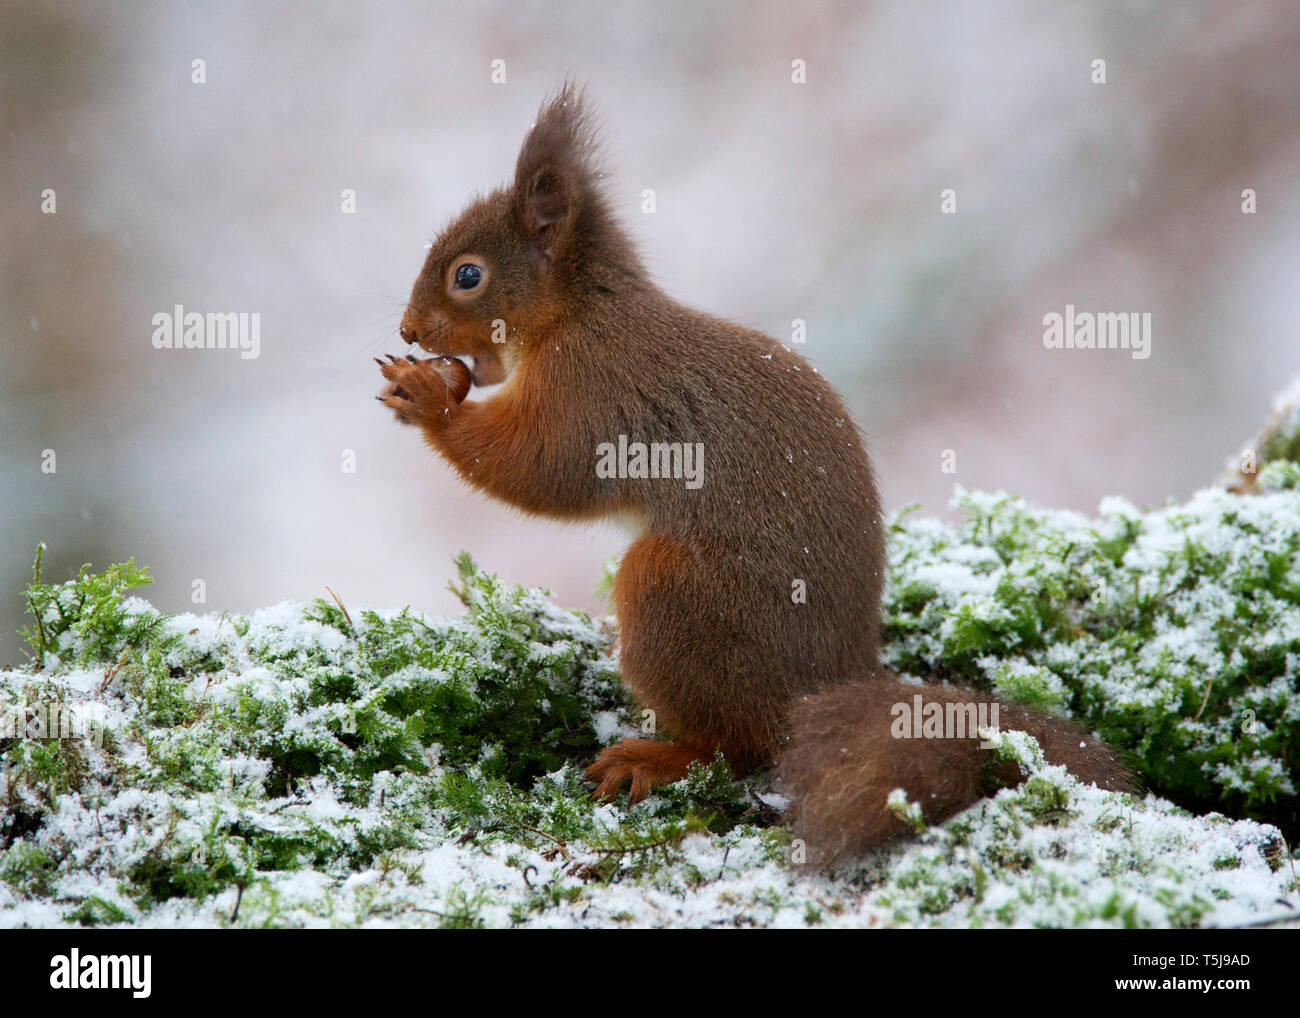 Scottish red squirrel feeing on frosty log, Dumfries Scotland Stock Photo